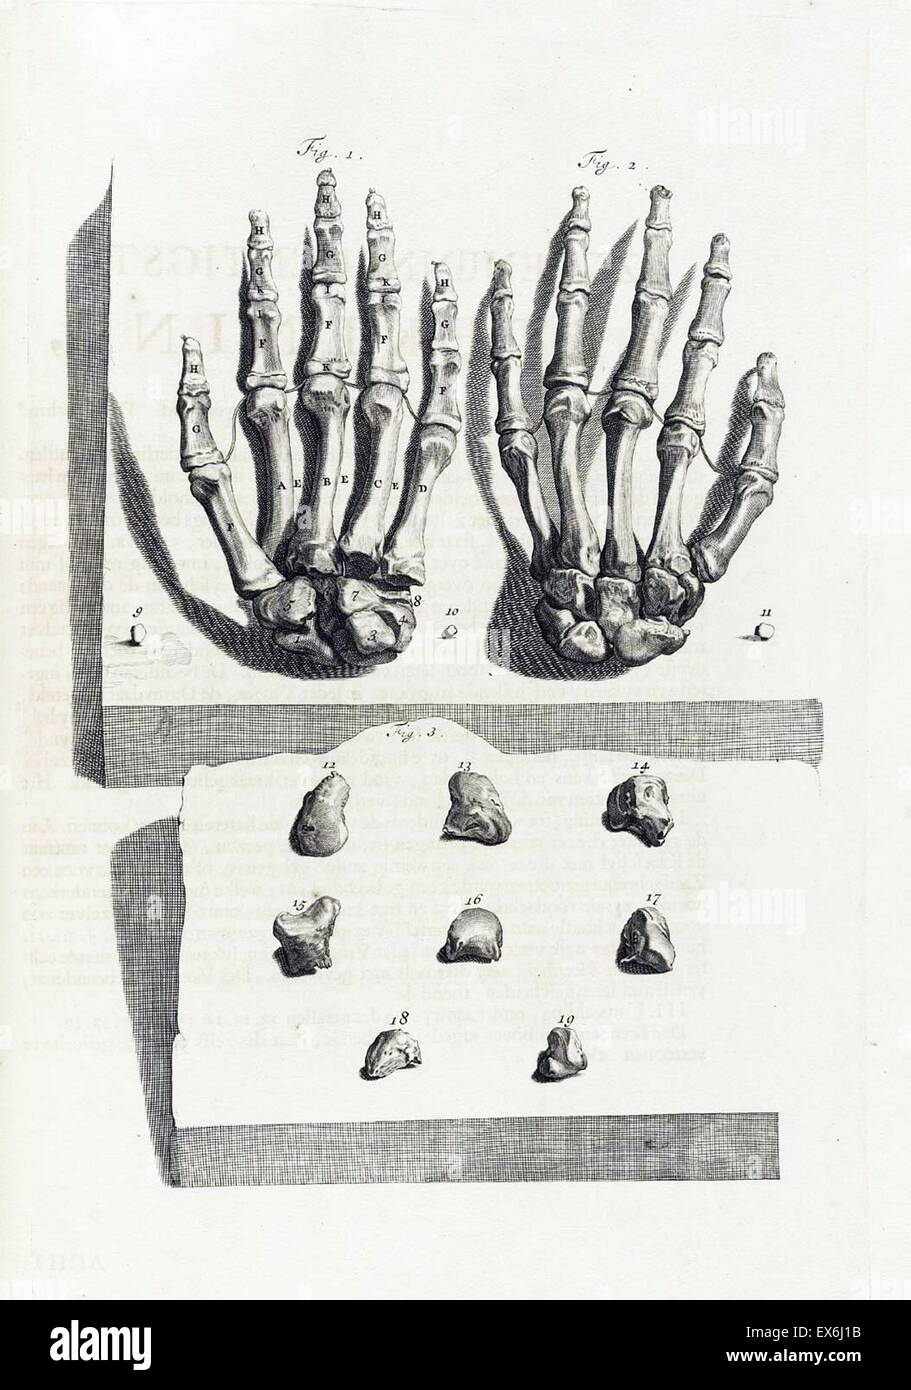 Illustrations by Govard Bidloo, from the anatomy textbook 'Ontleding des menschelyken Lichaams'. (Amsterdam 1690).Govard Bidloo was born in Amsterdam in 1649 and became professor of anatomy at The Hague from 1688 to 1696 Stock Photo